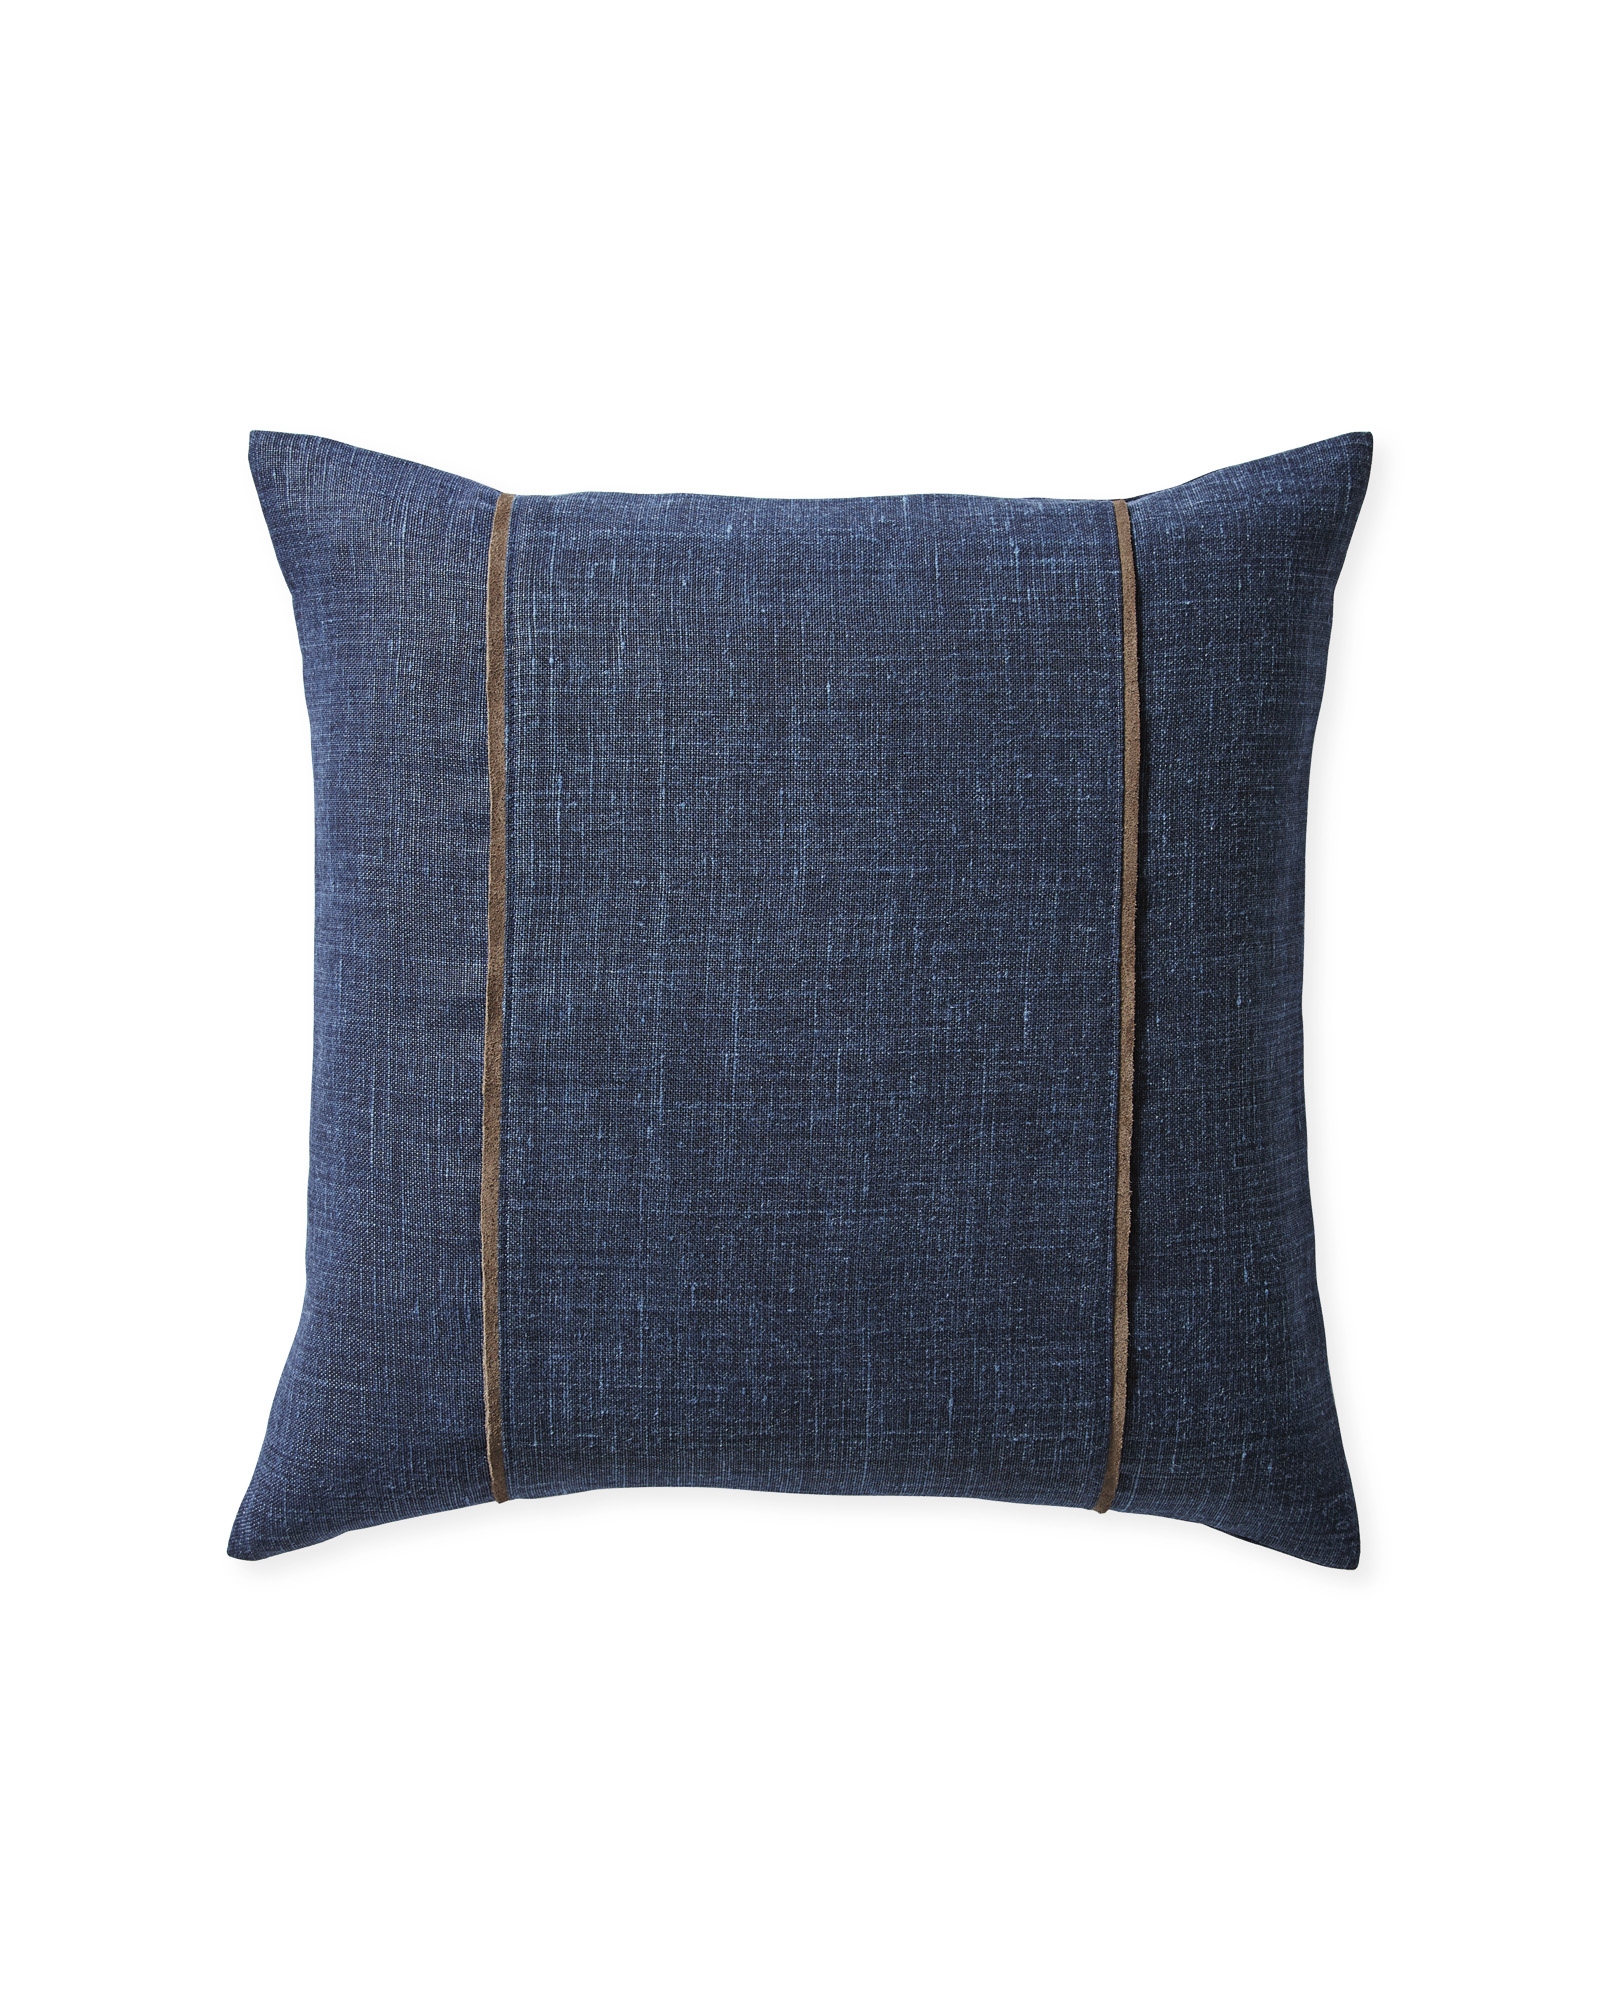 Kentfield 20" SQ Pillow Cover - Navy - Insert sold separately - Image 0